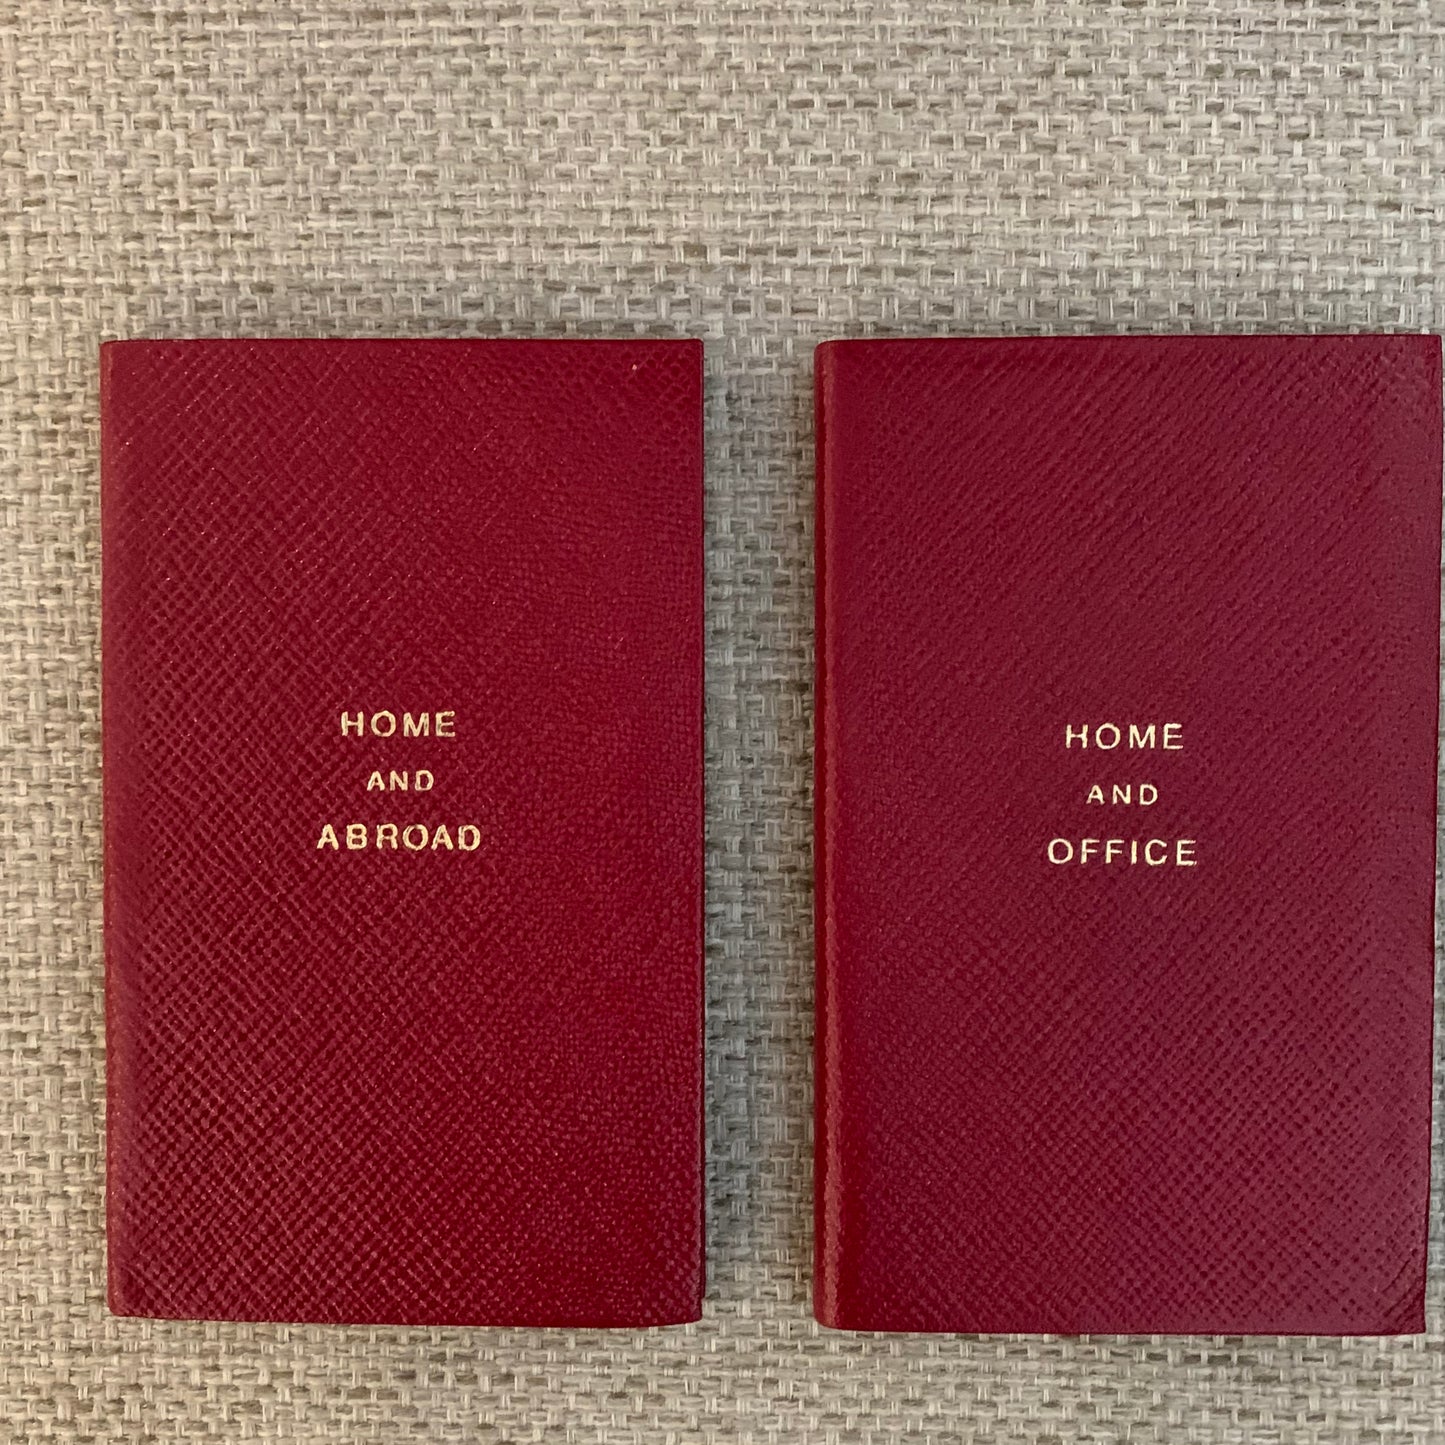 Address Book | Home and Abroad | Pocket Address Book | 5 by 3 inches | Cross Grain Leather | A53LHA